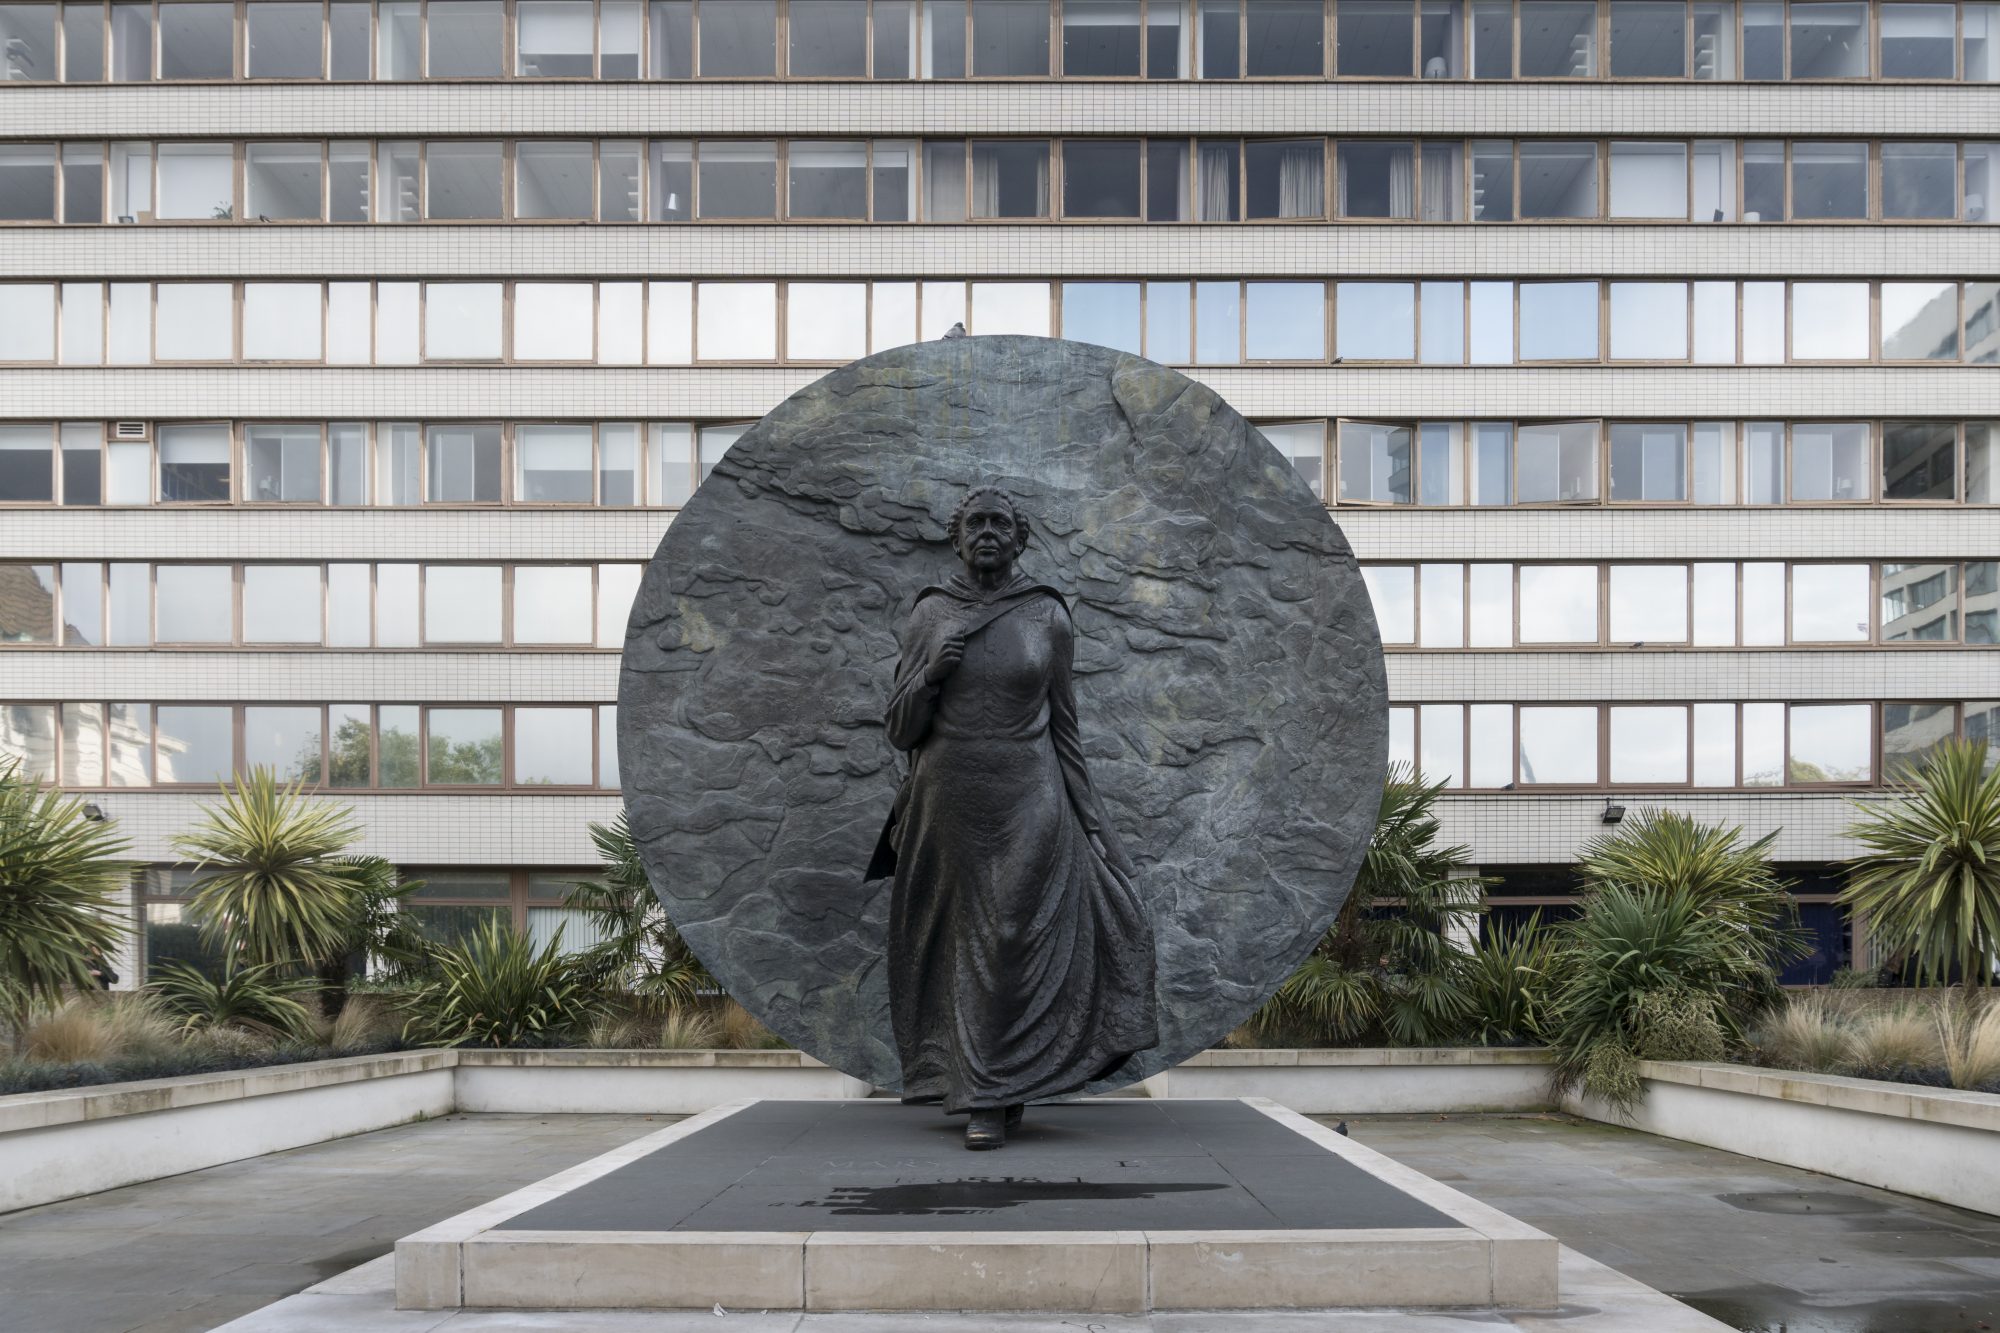 Mary Seacole statue in the grounds of St Thomas Hospital, London, UK